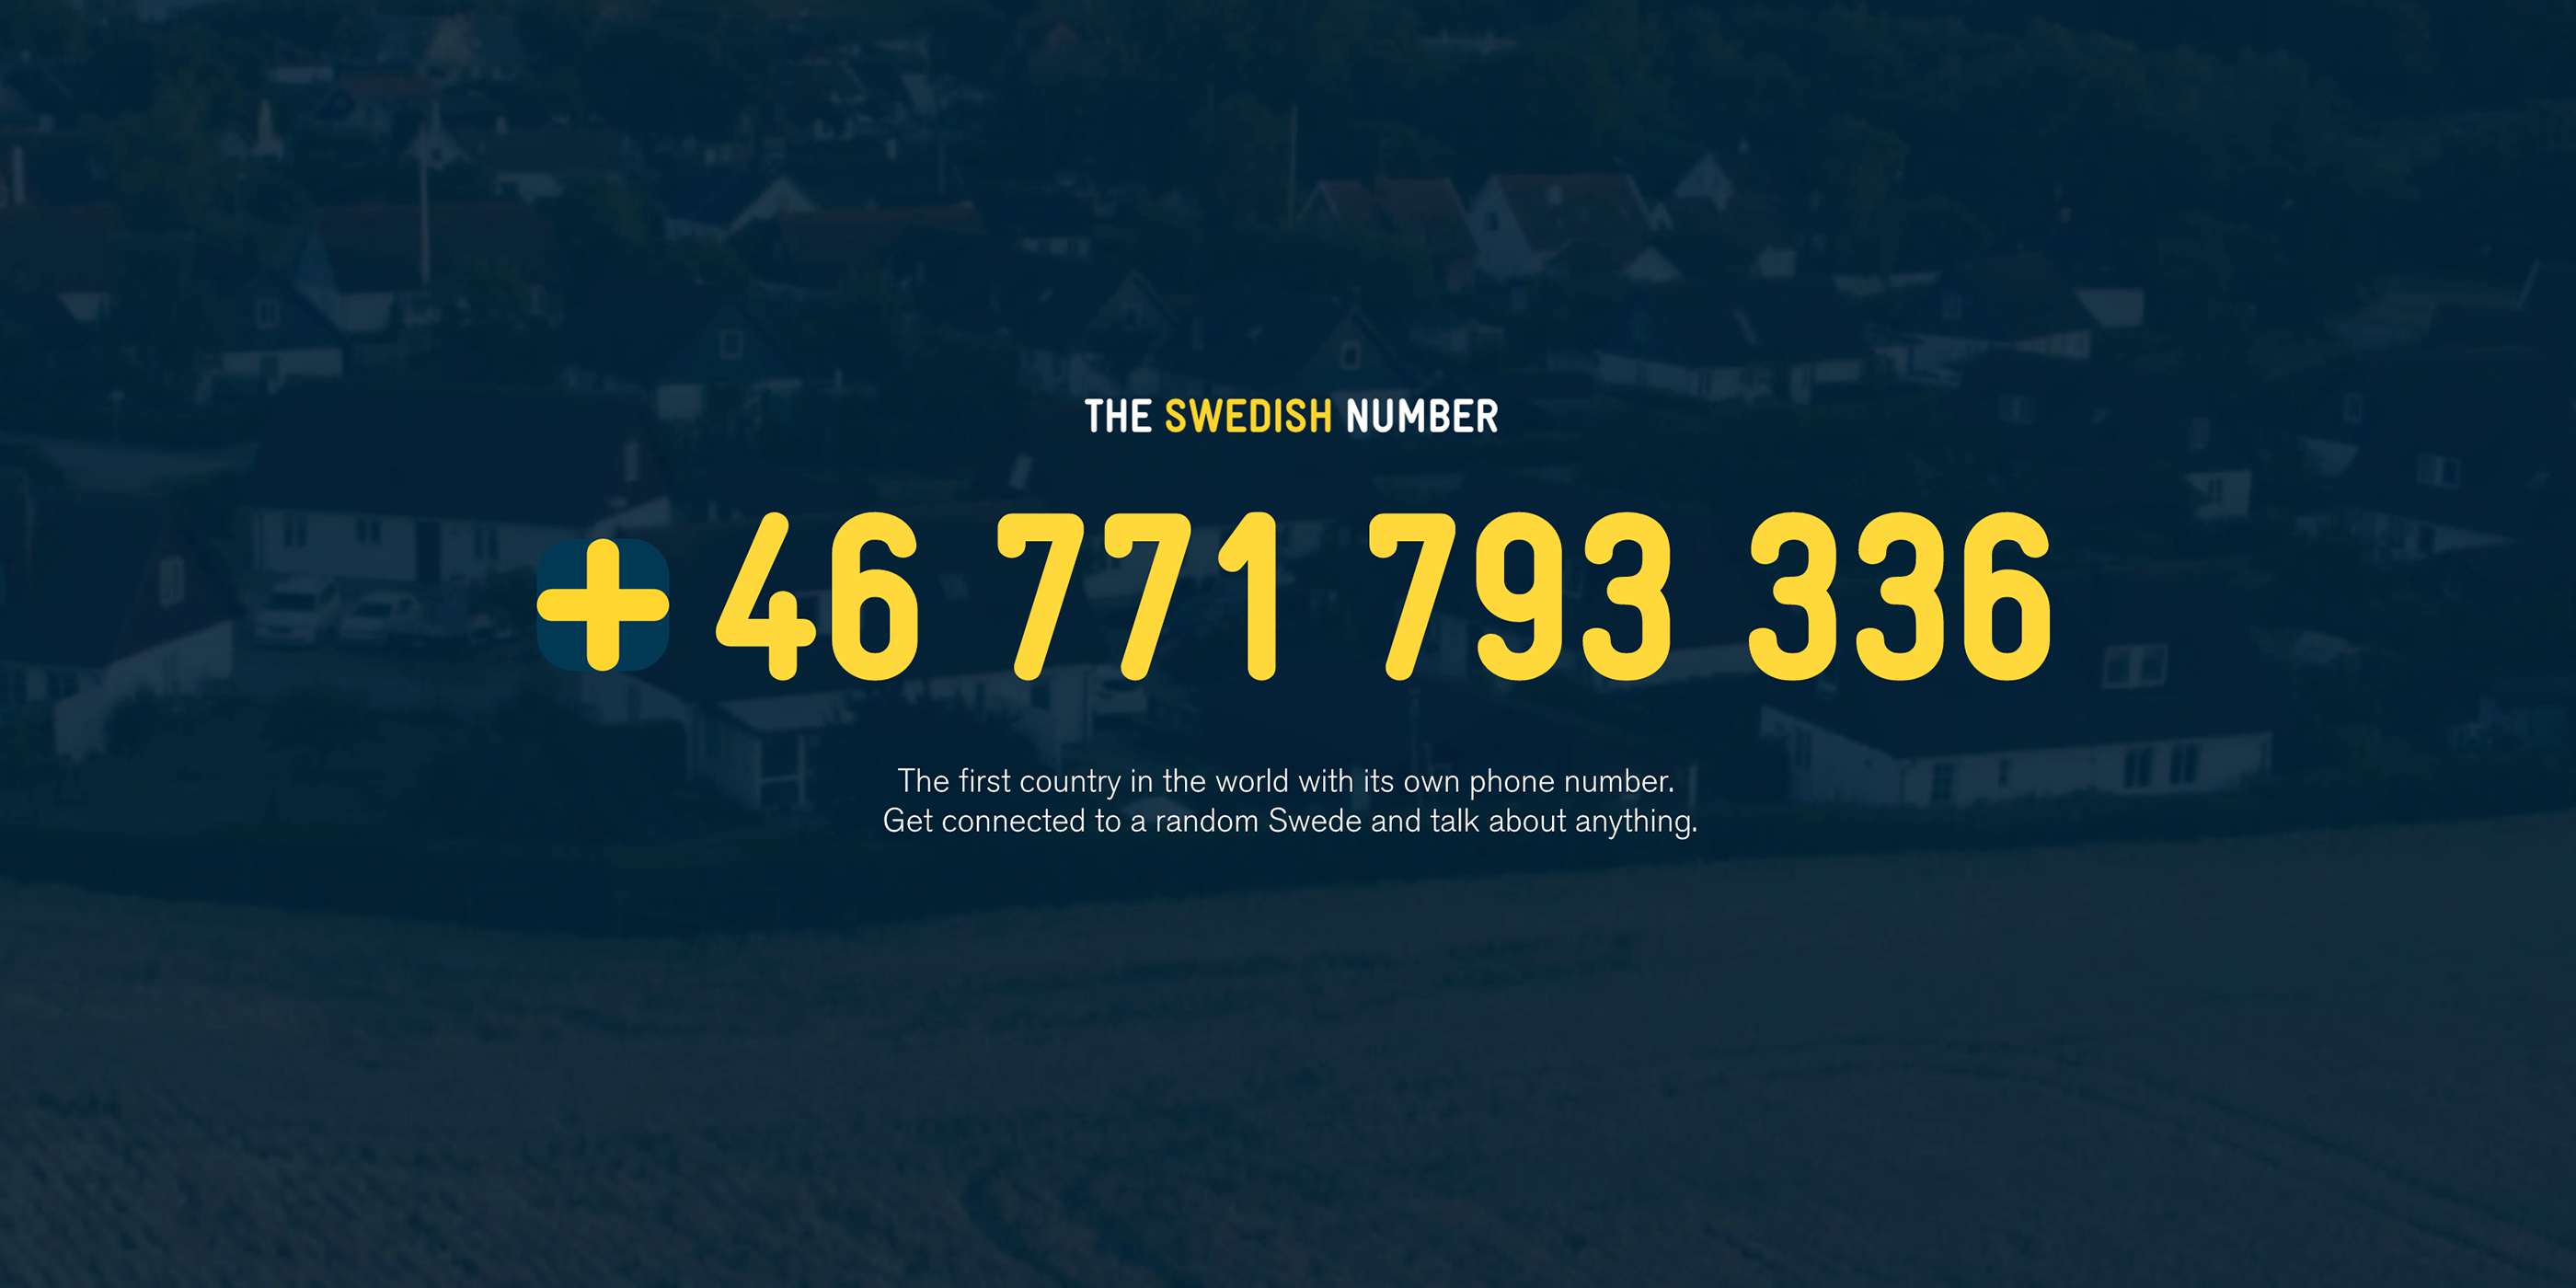 image for TIL in 2016, the Swedish Tourism Council created a single phone number that connected the caller to a random Swede for you to have a conversation with. In the 79 days it was open, almost 200,000 calls were made with a combined 367 days worth of conversations.